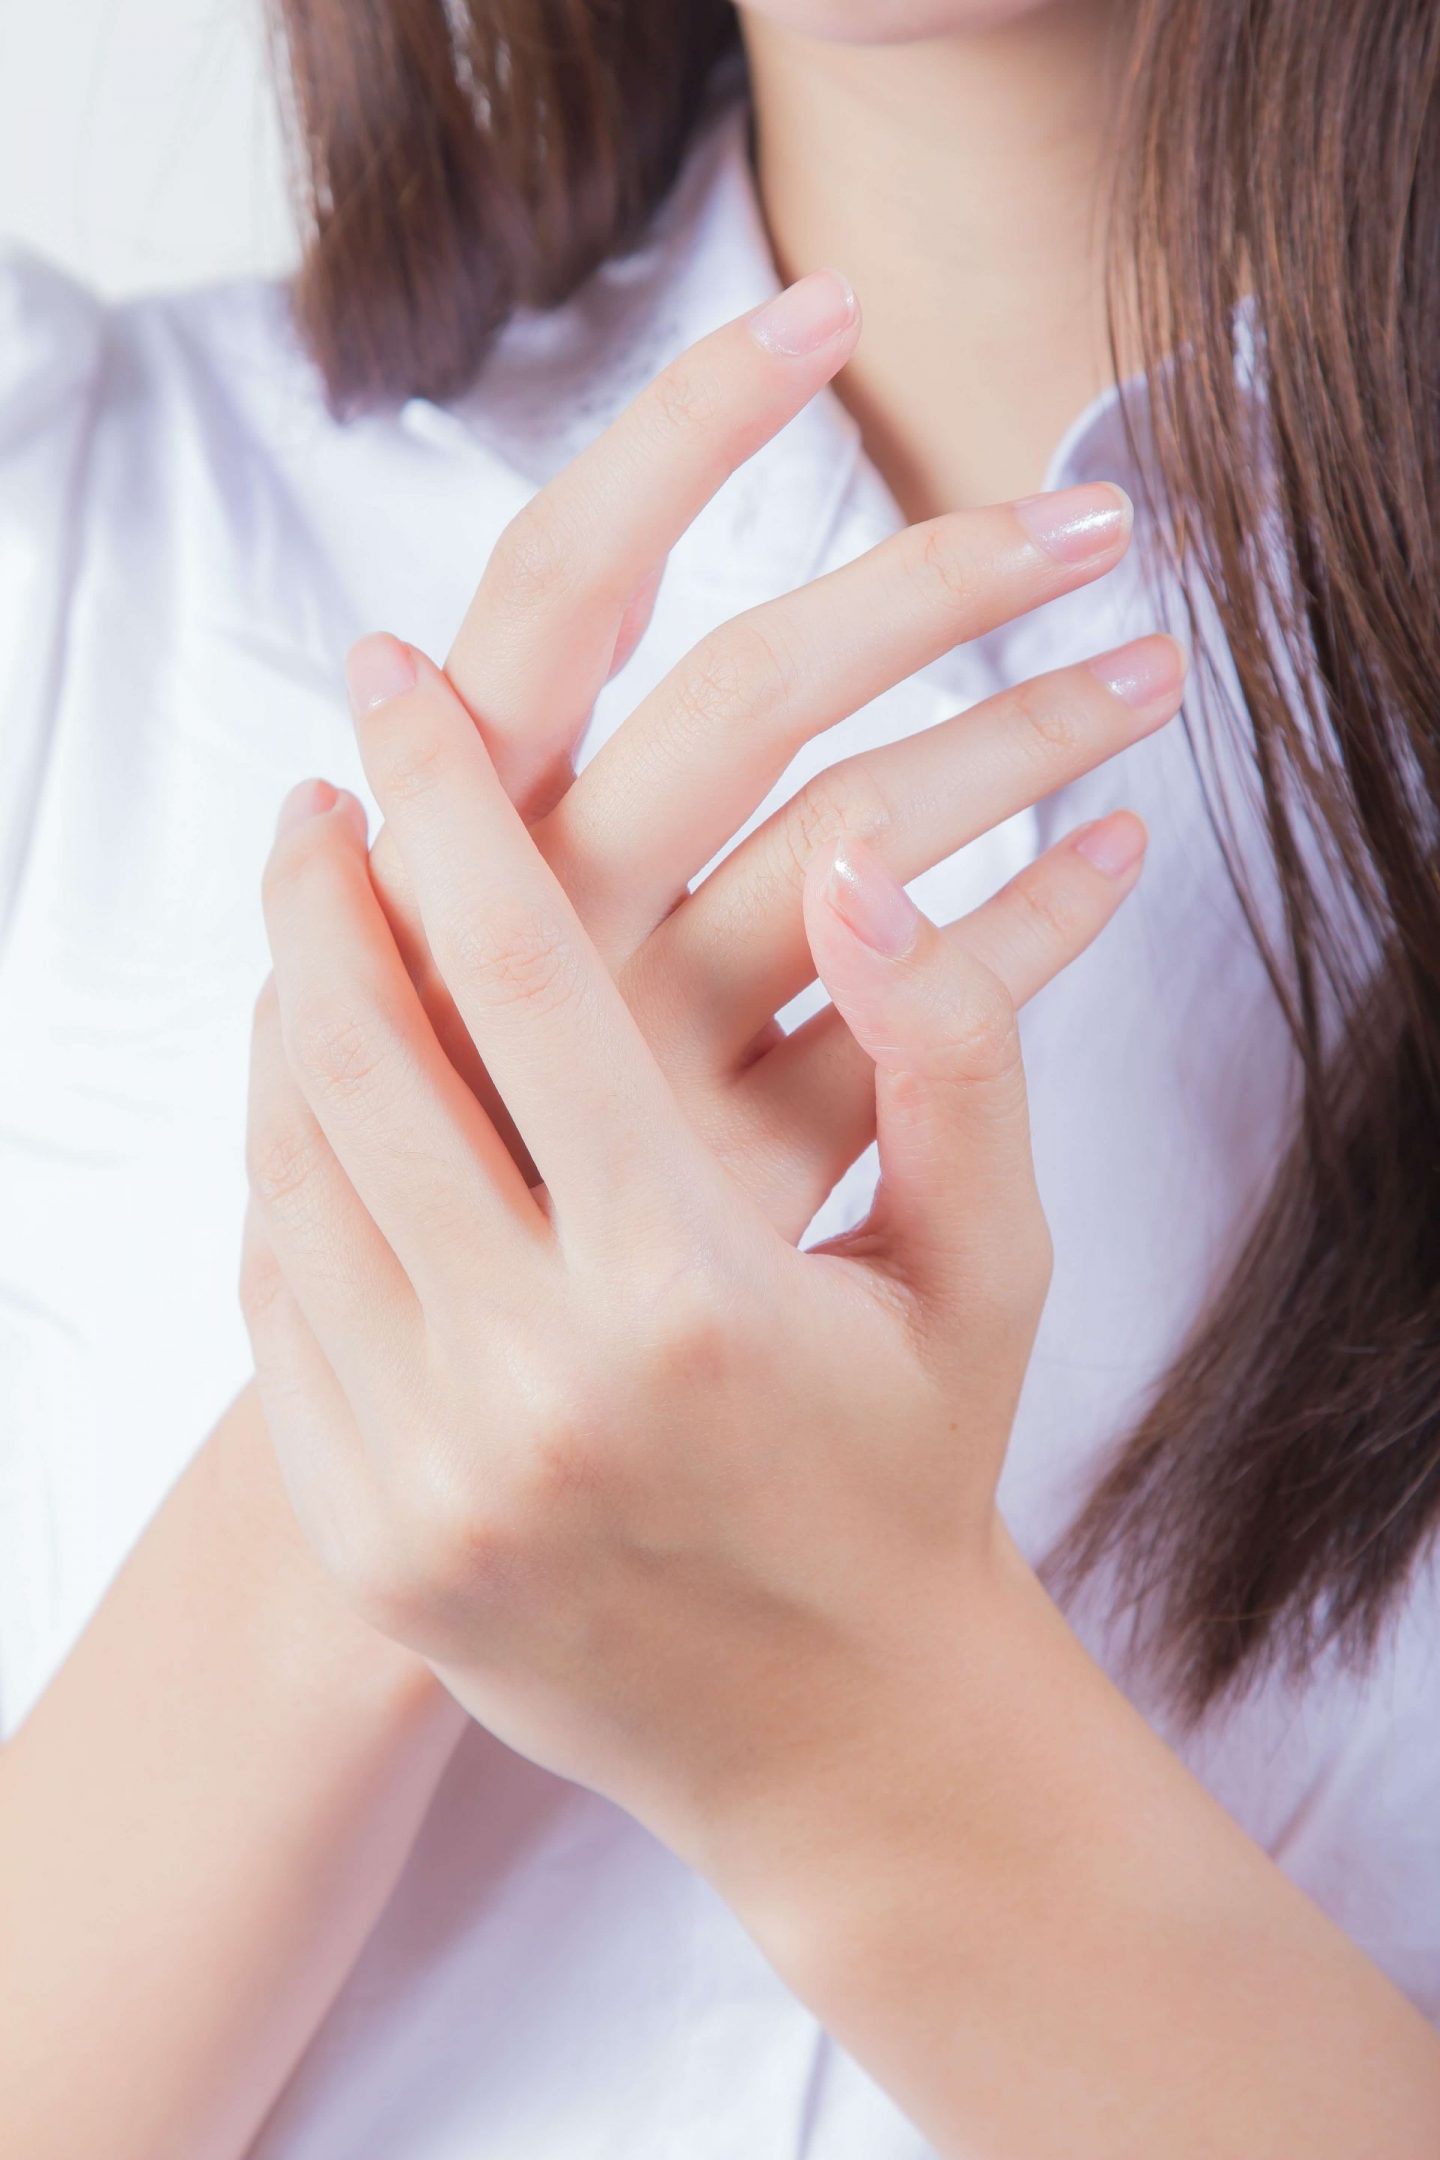 What Do Healthy Nails Look Like? Our Guide To Achieve A Manicured Look